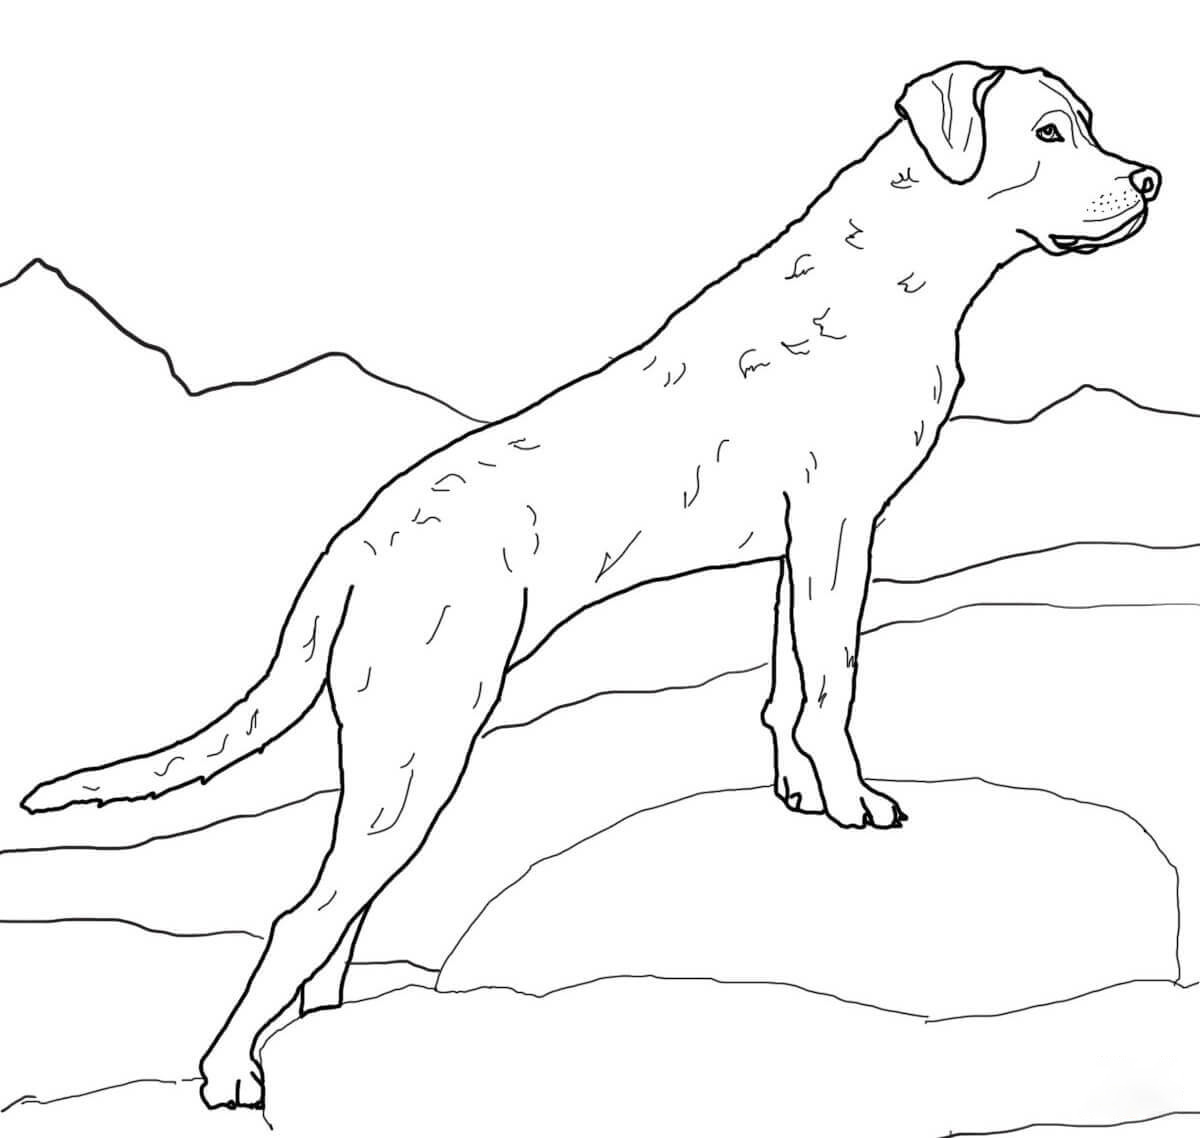 Chesapeake-bay Coloring Pages